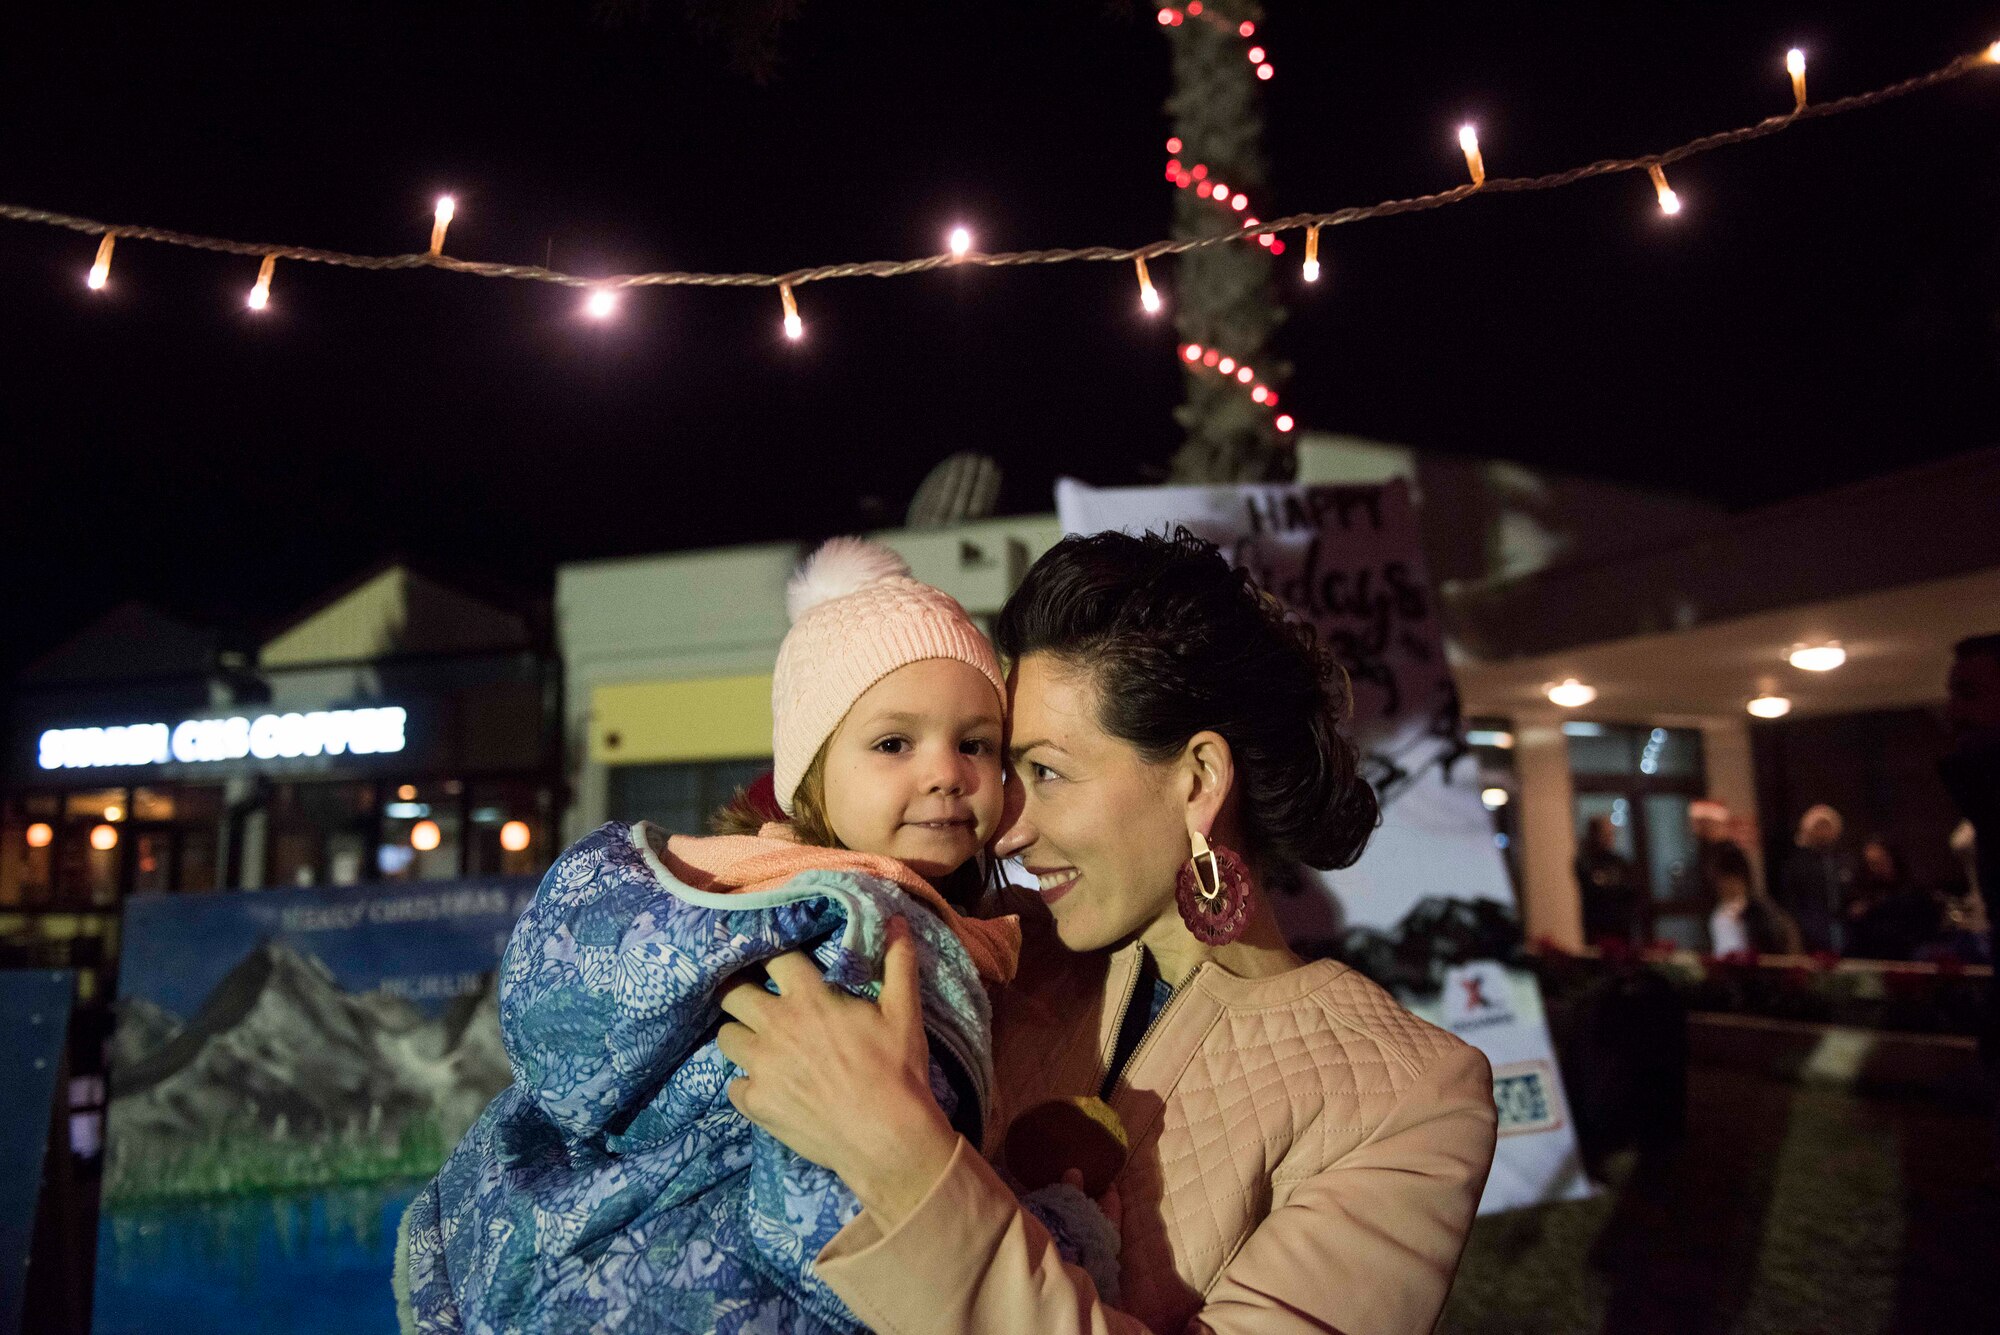 U.S. Air Force Maj. Crystal Karahan, 39th Air Base Wing executive officer, holds her daughter after the base Christmas tree lighting ceremony Dec. 5, 2019, at Incirlik Air Base, Turkey. U.S., Turkish and Spanish members of the community attended the ceremony. (U.S. Air Force photo by Staff Sgt. Joshua Magbanua)